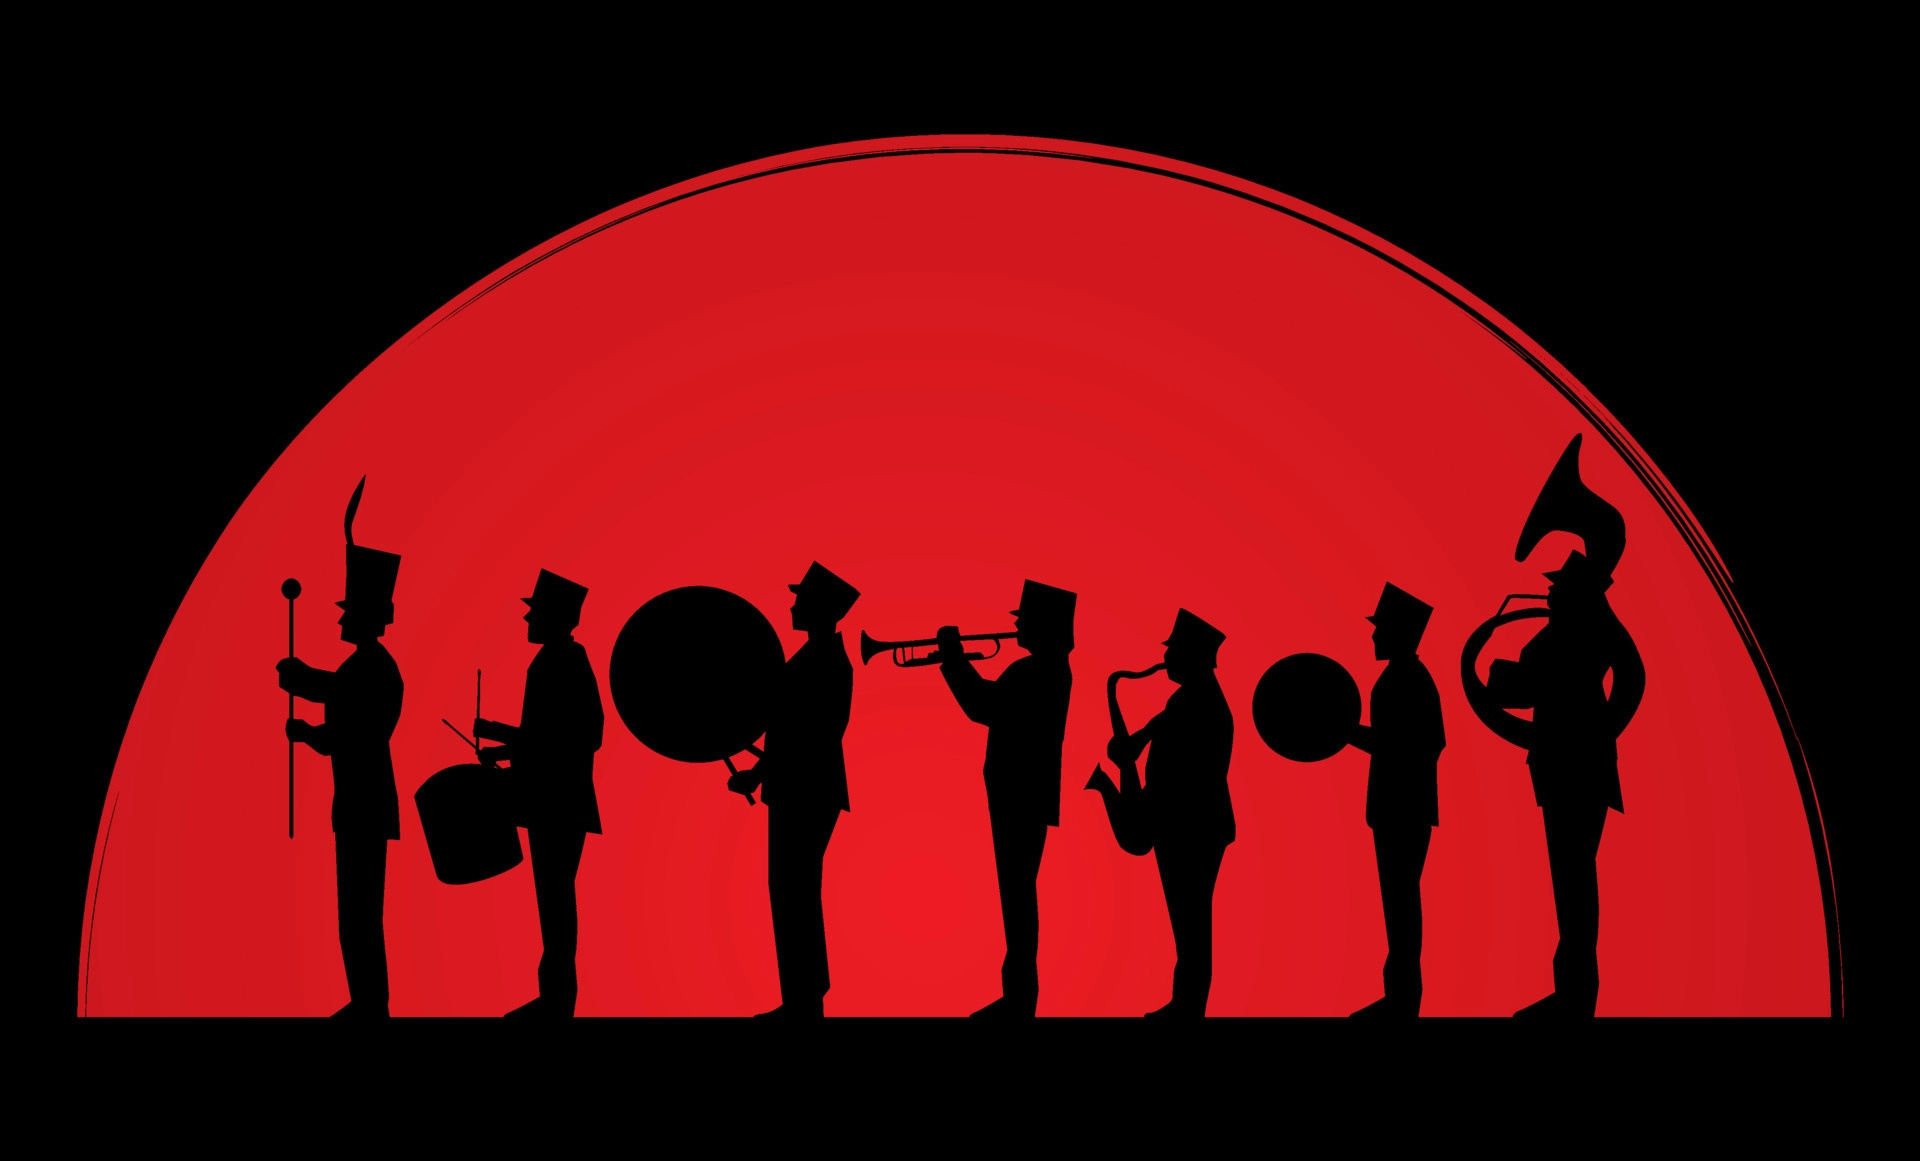 Marching Band: Vector Art, Silhouettes, A group of musicians playing instruments while walking together at a parade. 1920x1170 HD Wallpaper.